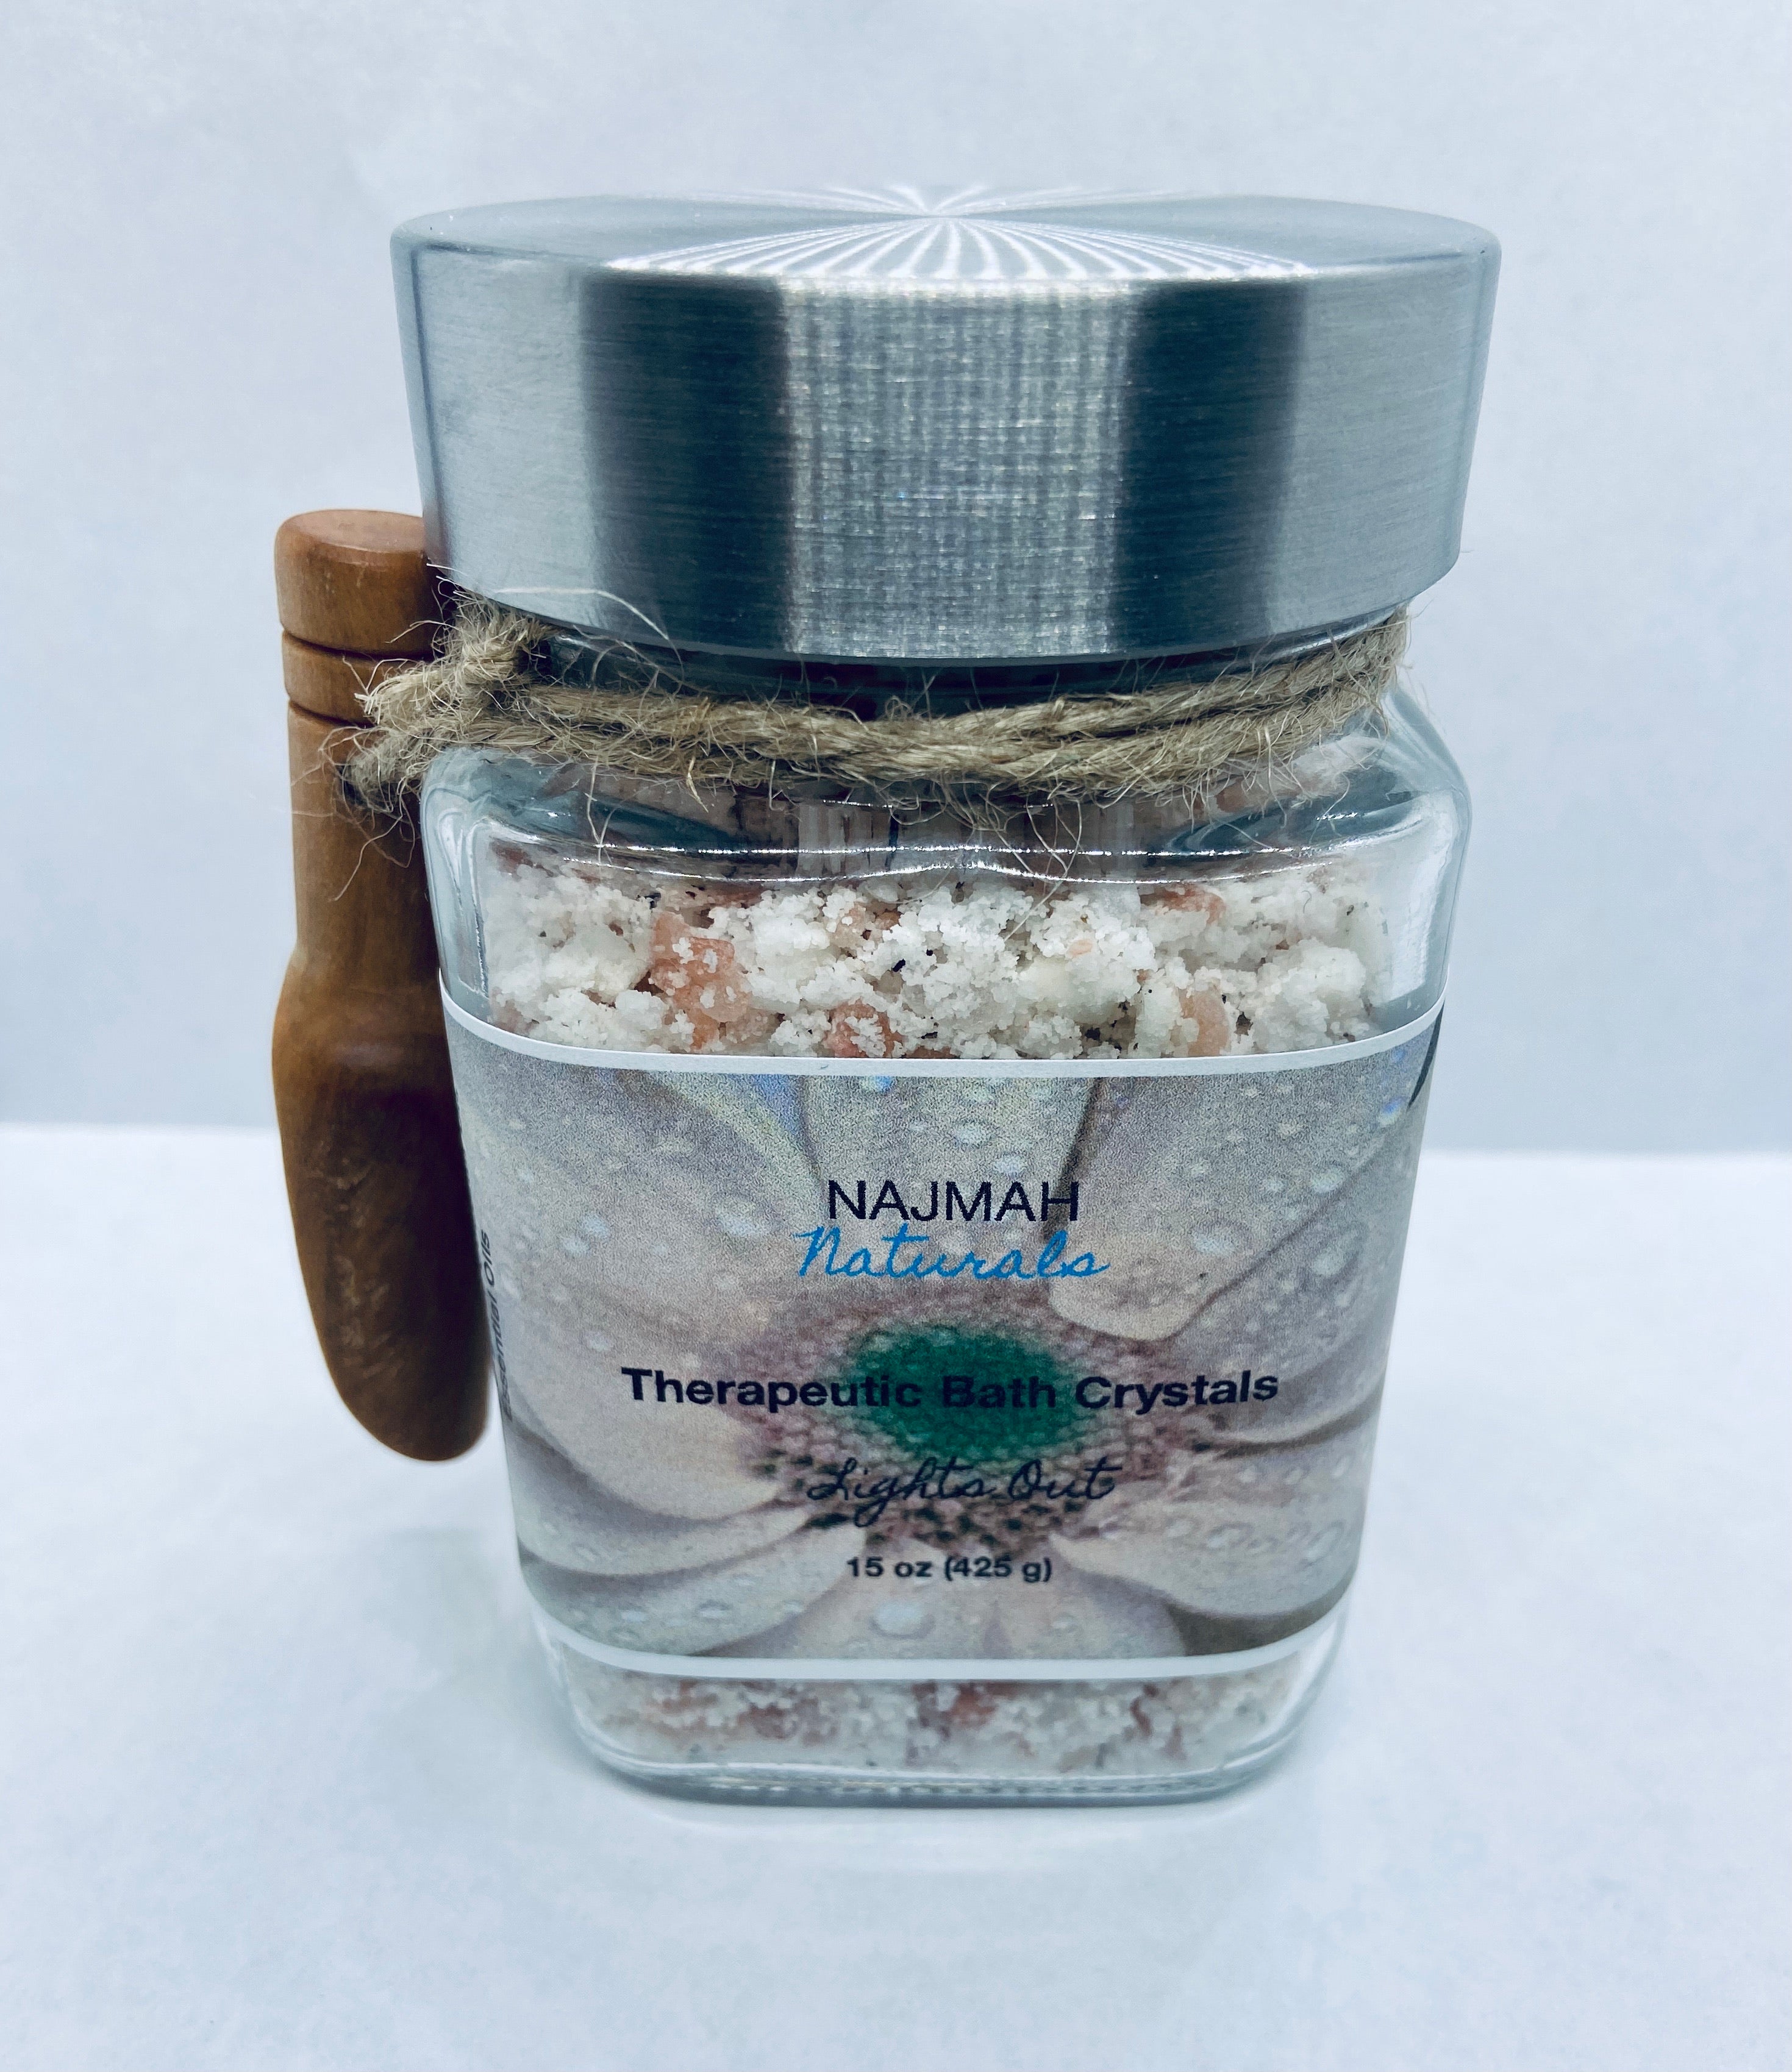 Our Lights Out Therapeutic Bath Crystals are the ultimate relaxation, self care herbal salts with Epson Salt, Himalayan Pink Salt, Sodium Bicarbonate (Aluminum-Free), Lavender Flowers, Organic Coconut Oil and Essential Oils.